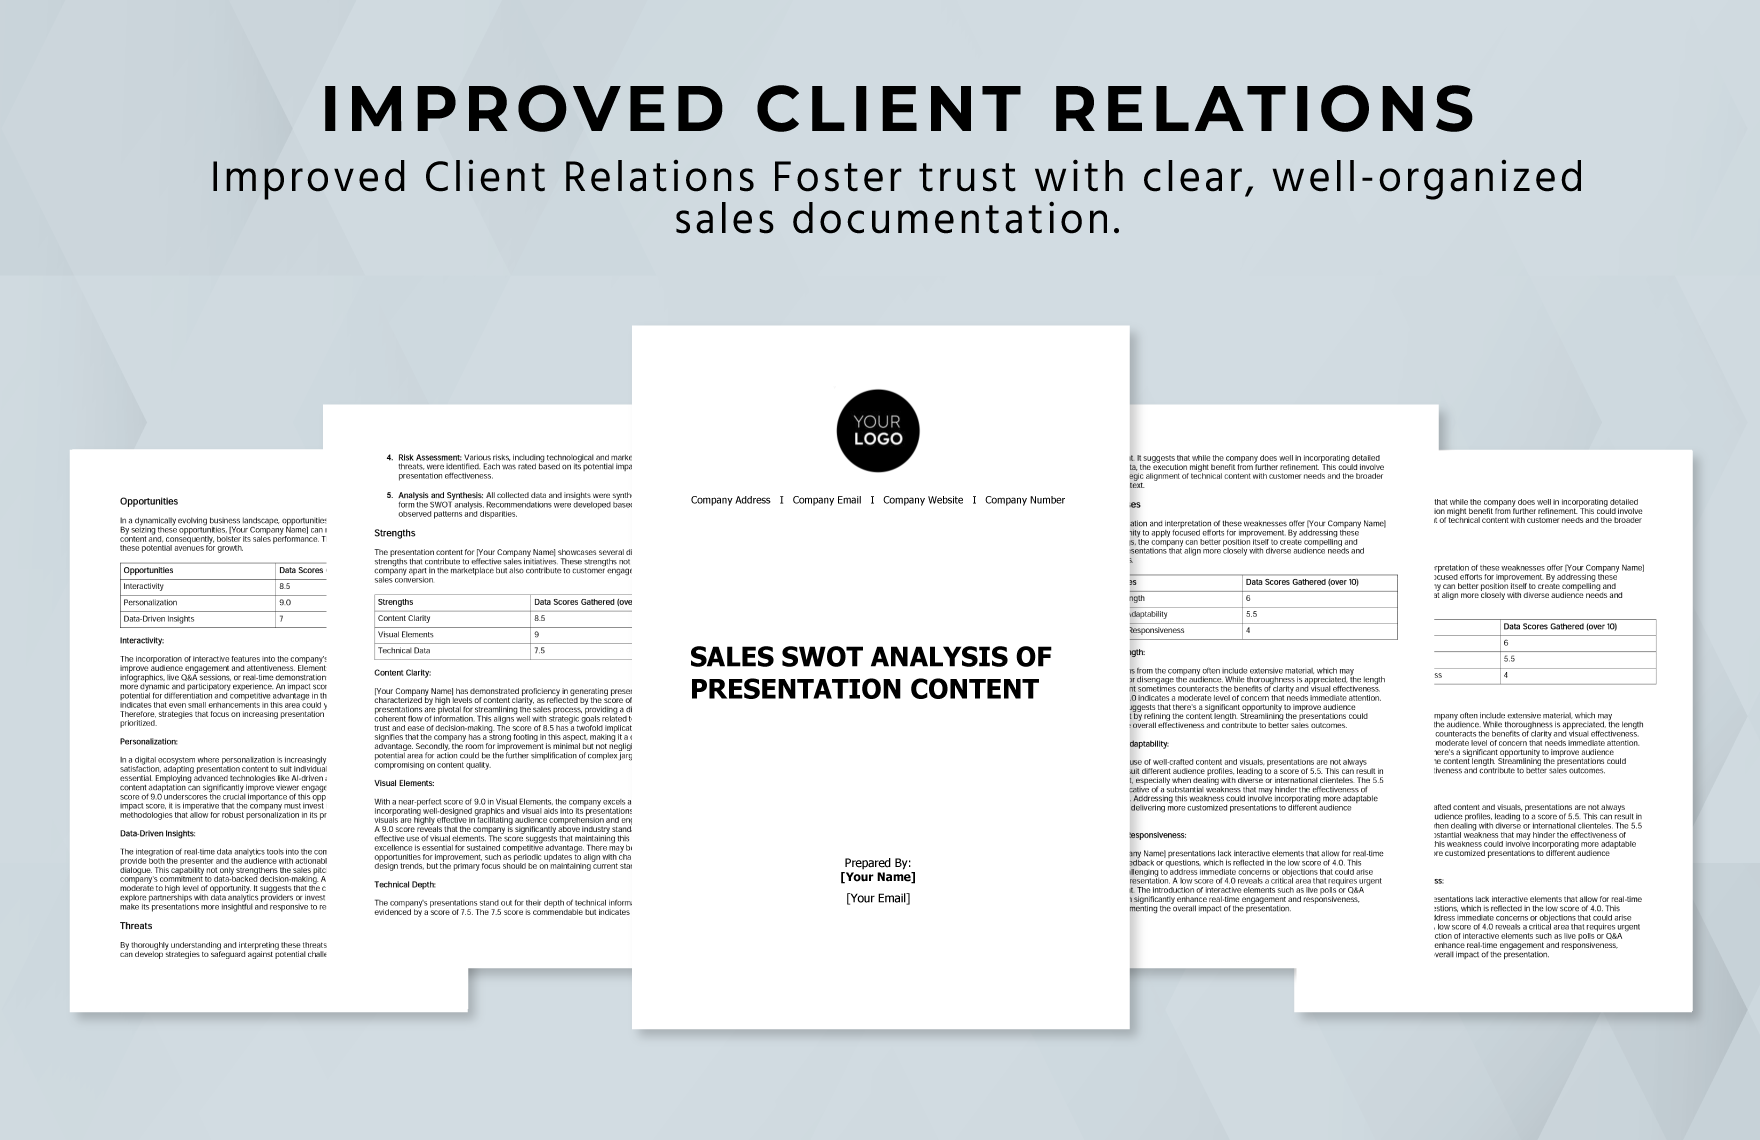 Sales SWOT Analysis of Presentation Content Template